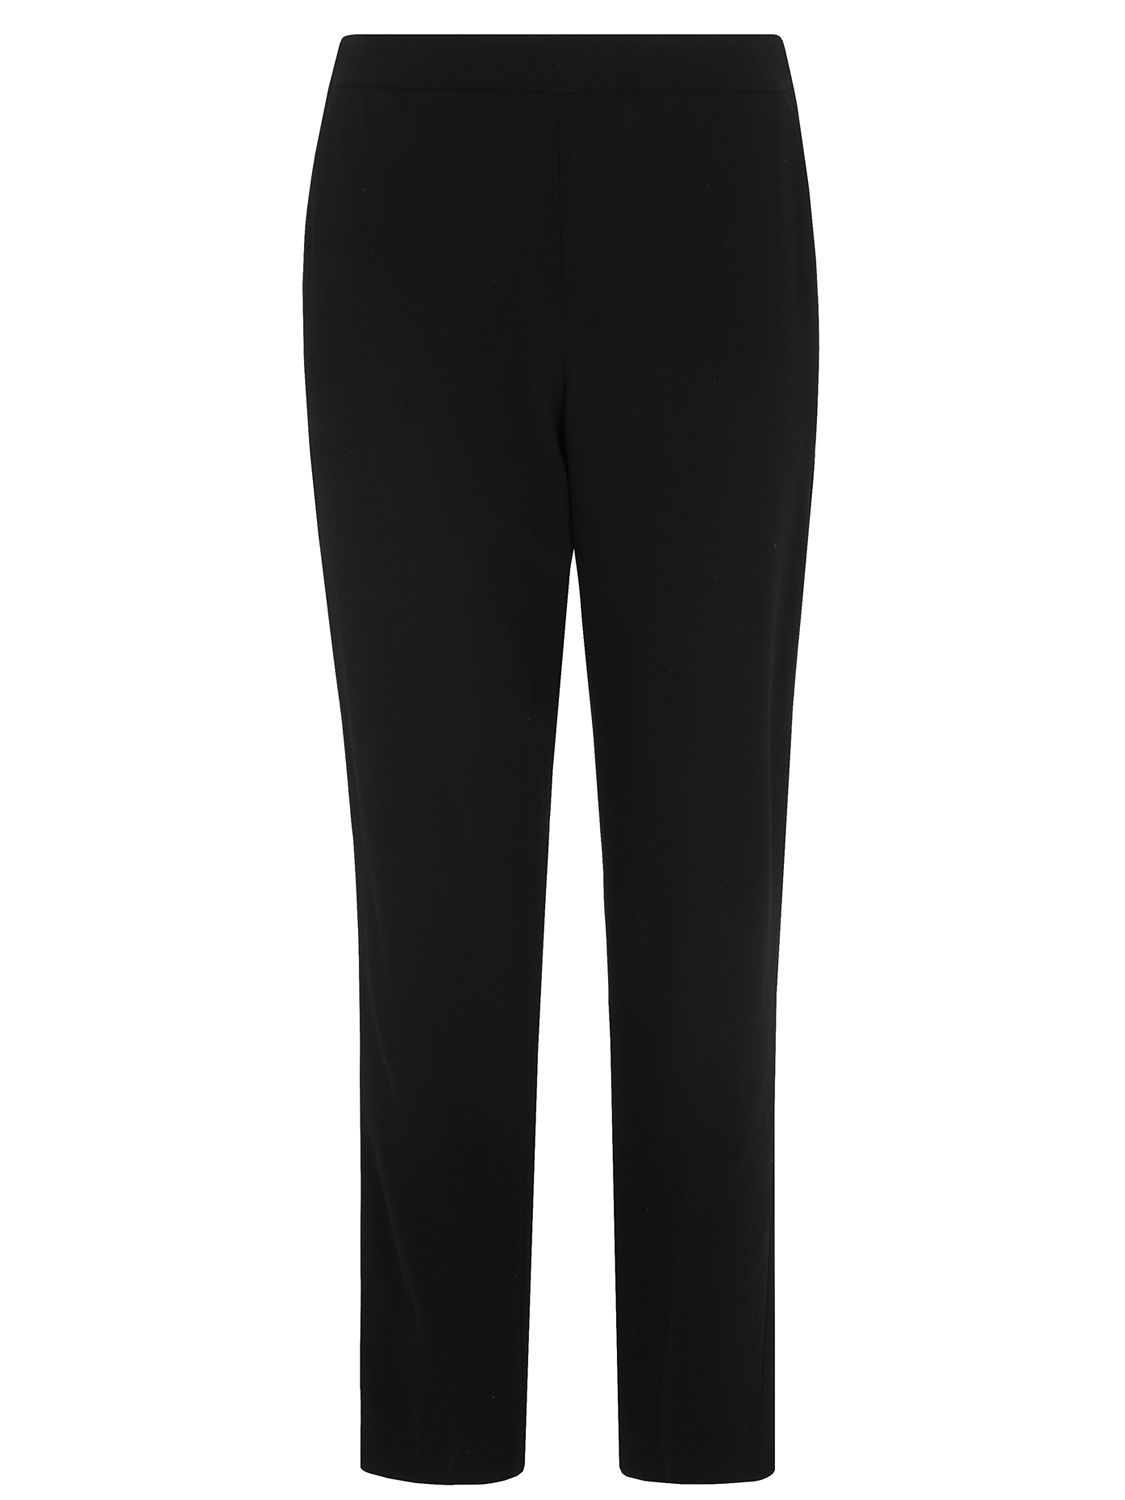 Whistles Anna Elasticated Waist Trousers at John Lewis